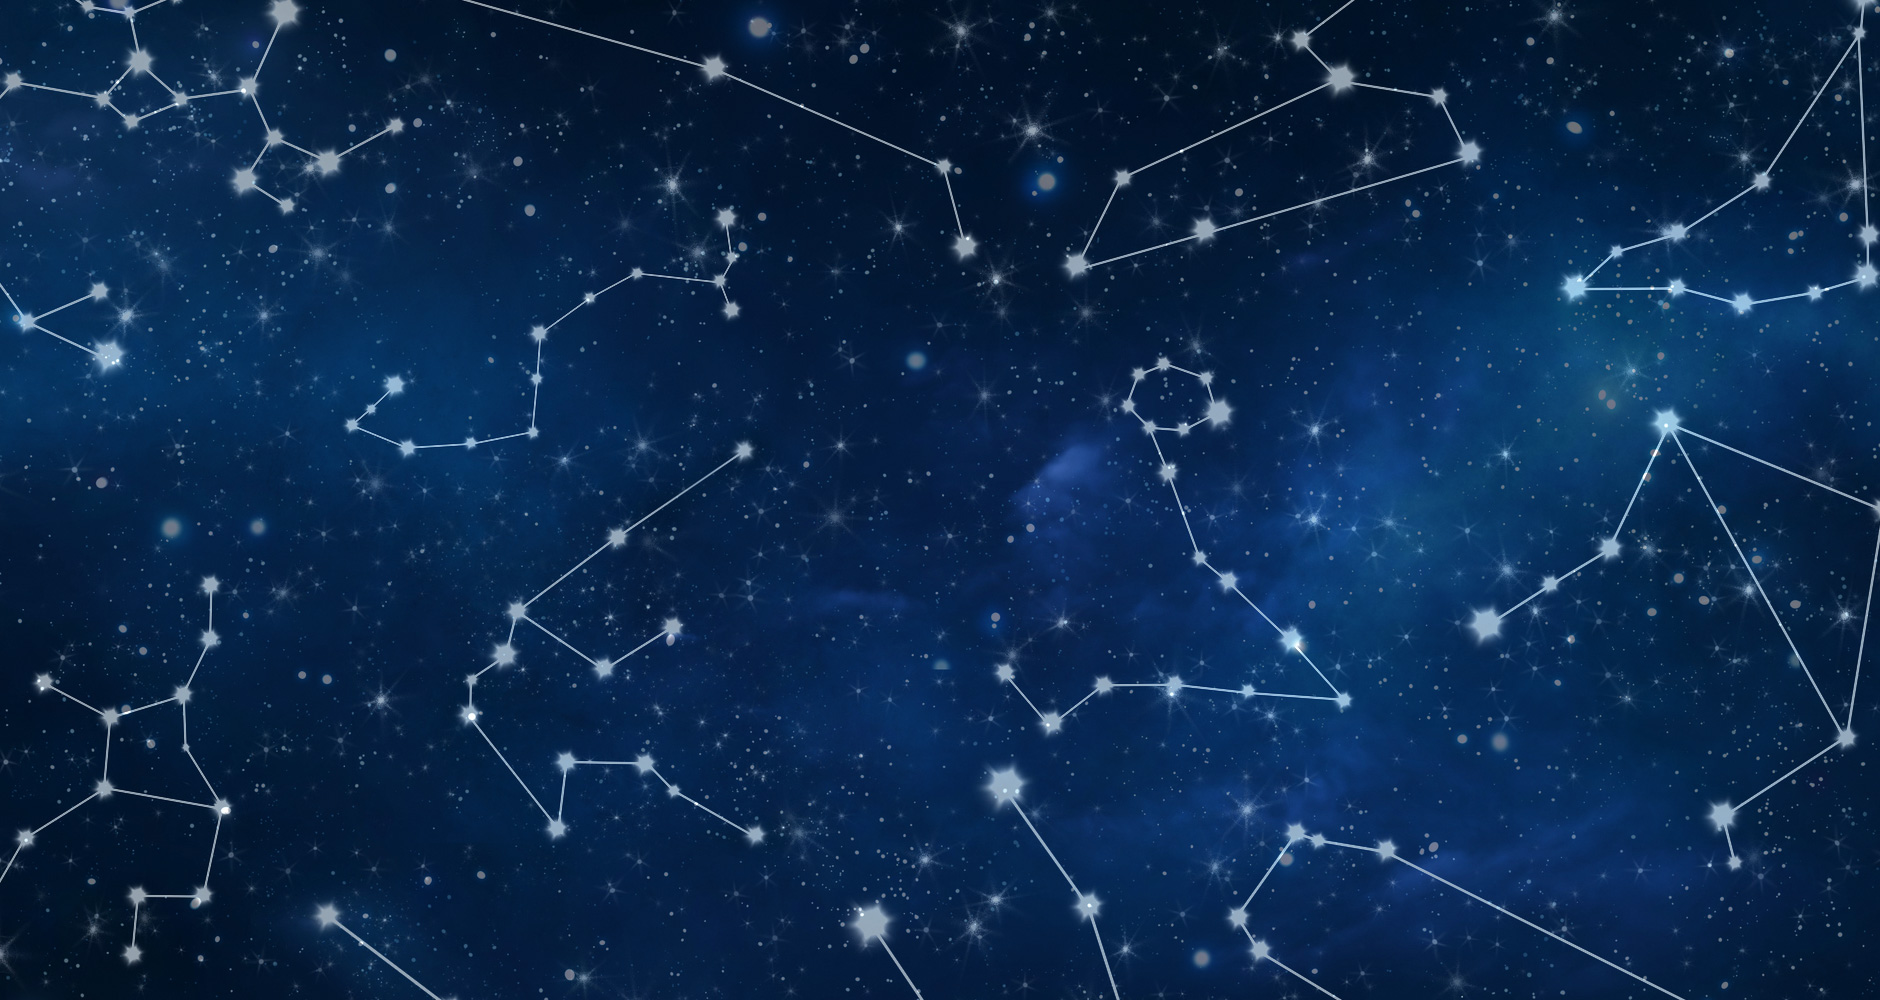 midnight sky with stars laid out into constellations